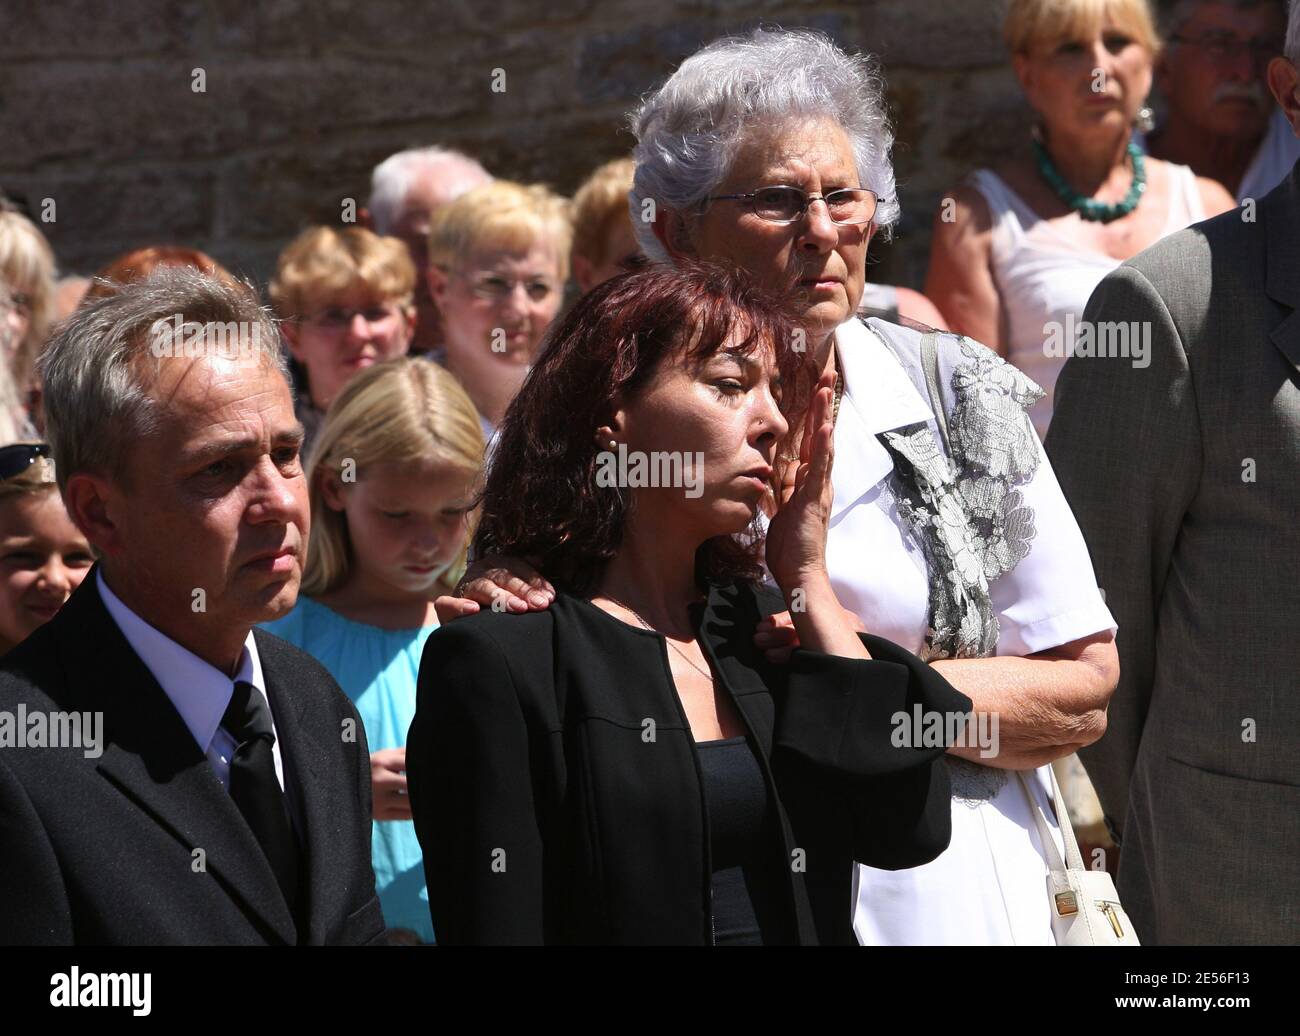 Enhed vandtæt skræmmende The parents of Valentin, Jean-Pierre Cremault and Veronique Cremault with  grand mothers and brother Florian attend the funeral ceremony of Valentin  Cremault in Hieres-sur-Amby, Isere, France, on August 05, 2008. Photo by